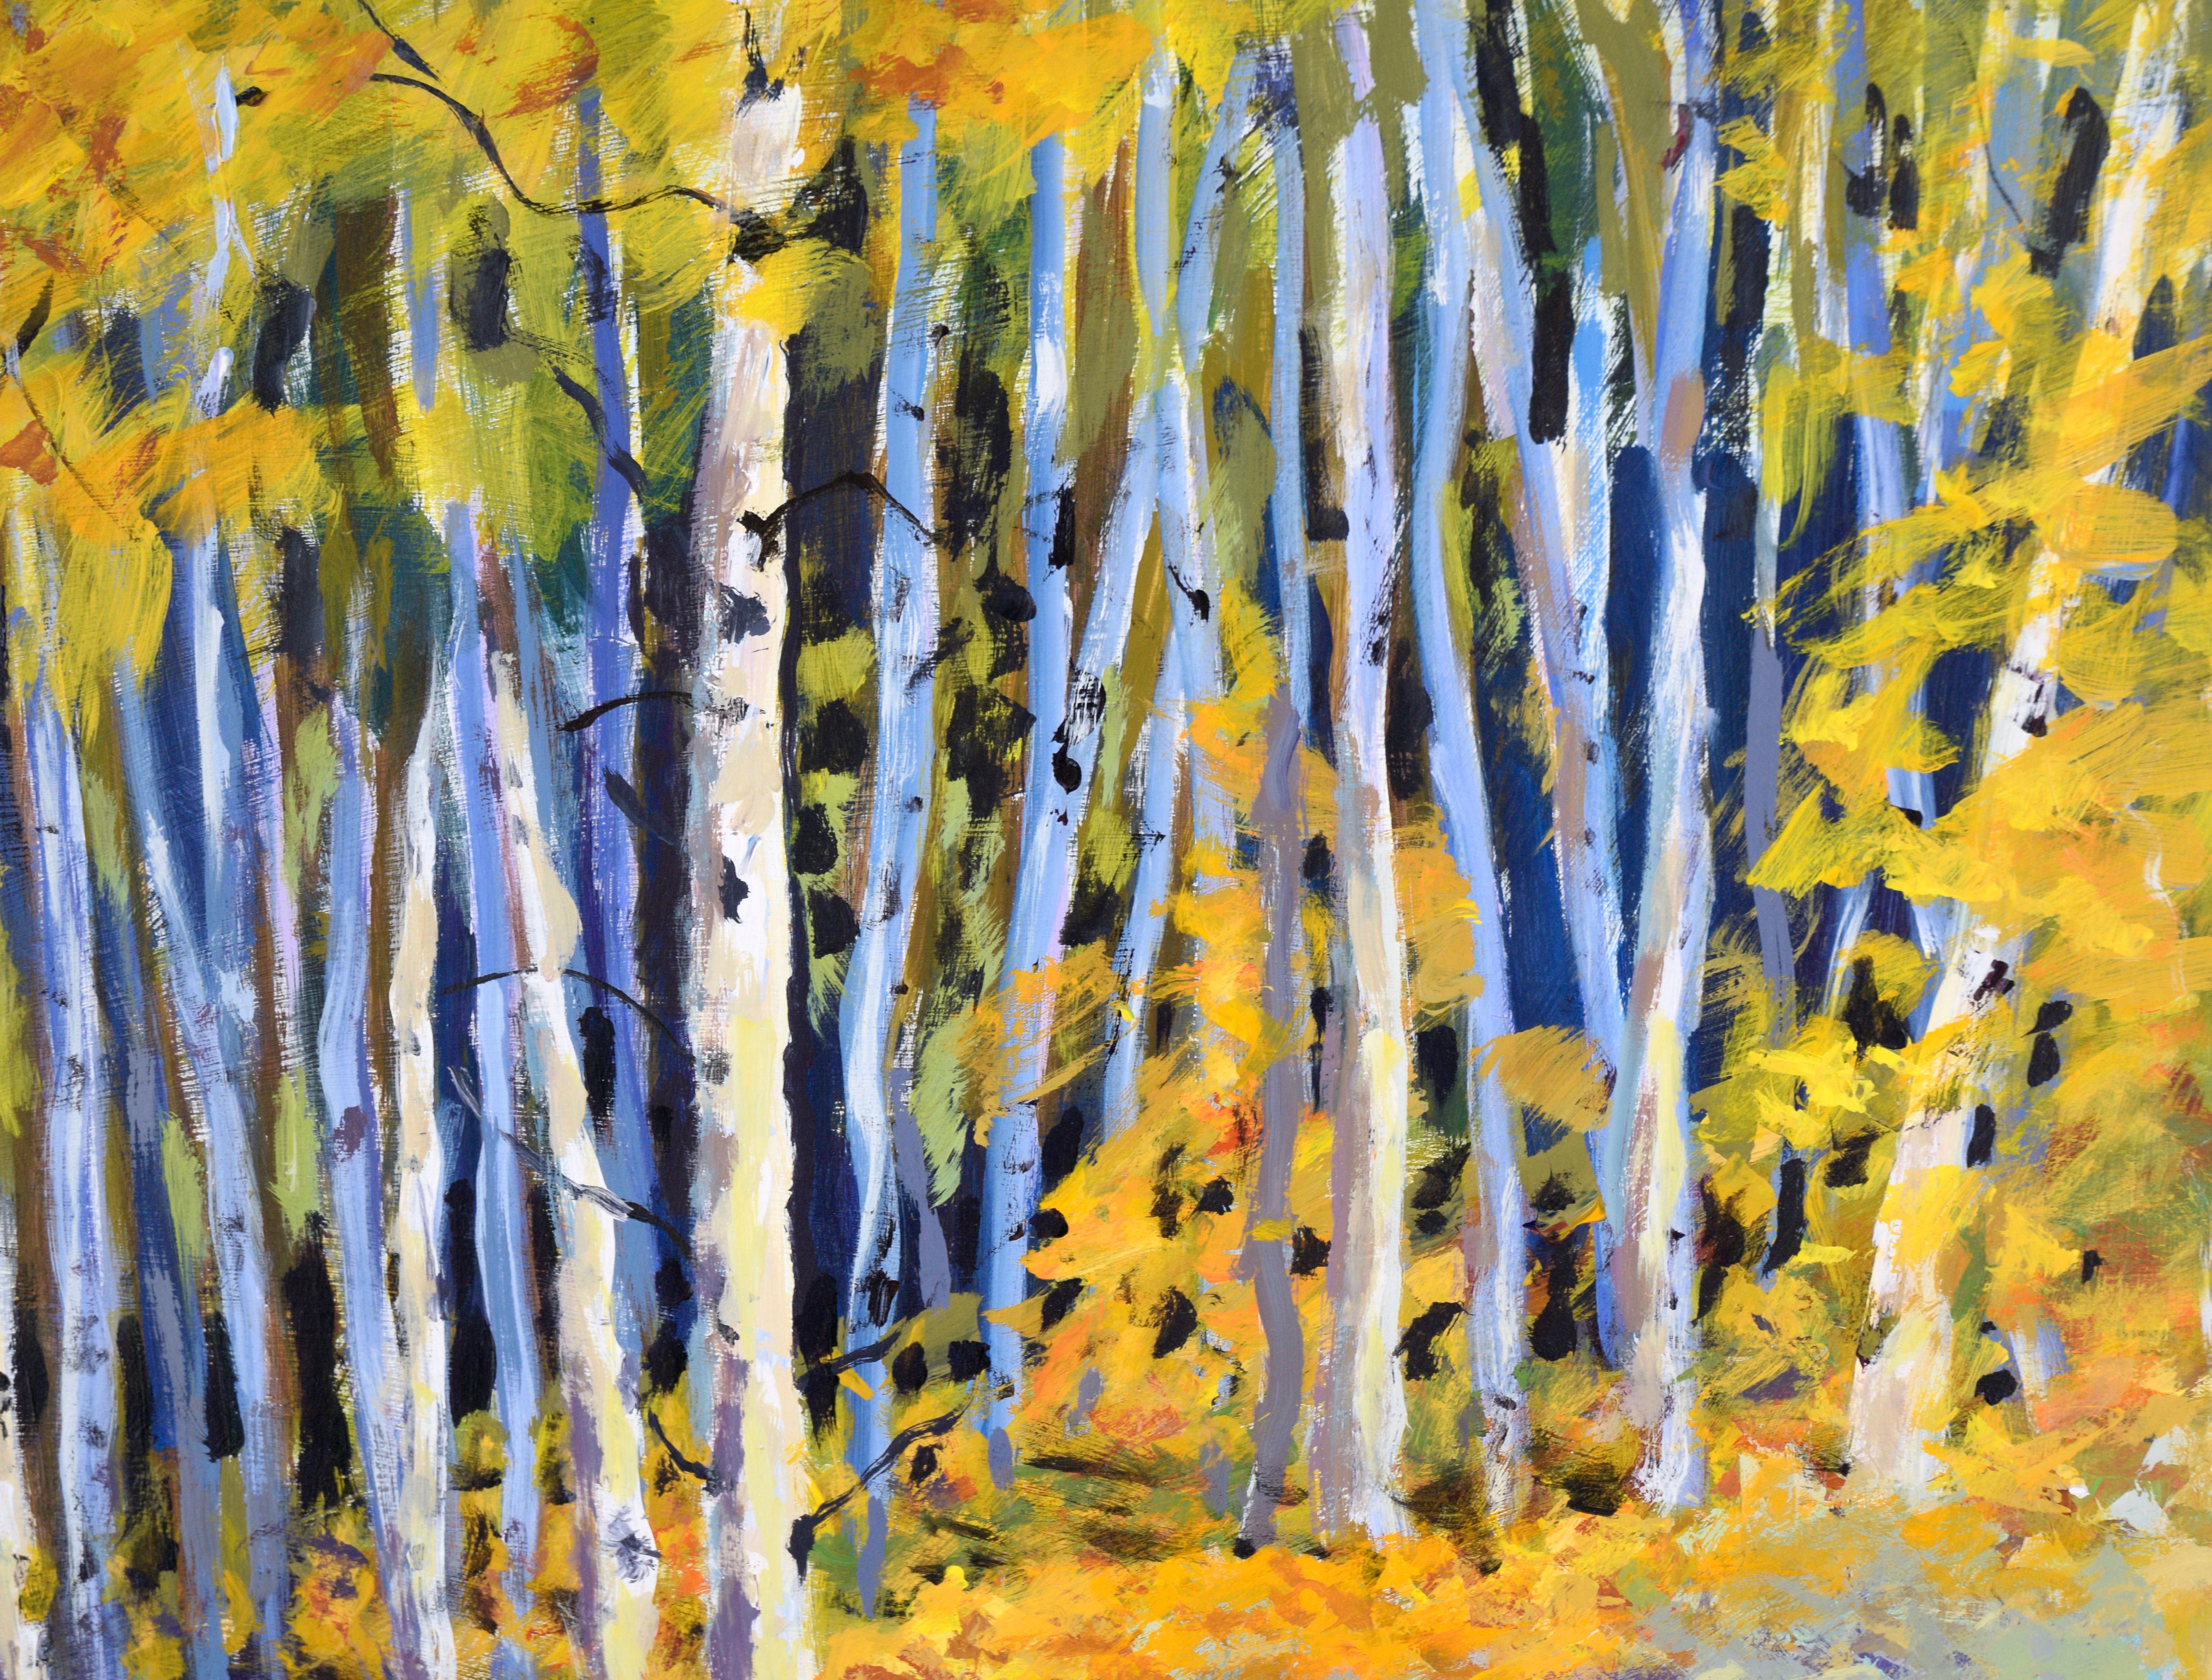 Bison in the Birch Forest - Western Plein Aire Landscape in Acrylic on Board

Lush Western landscape by California Plein Aire artist Nick White (American, 1943-2009). A large white and yellow aspen forest creates the backdrop for this composition.